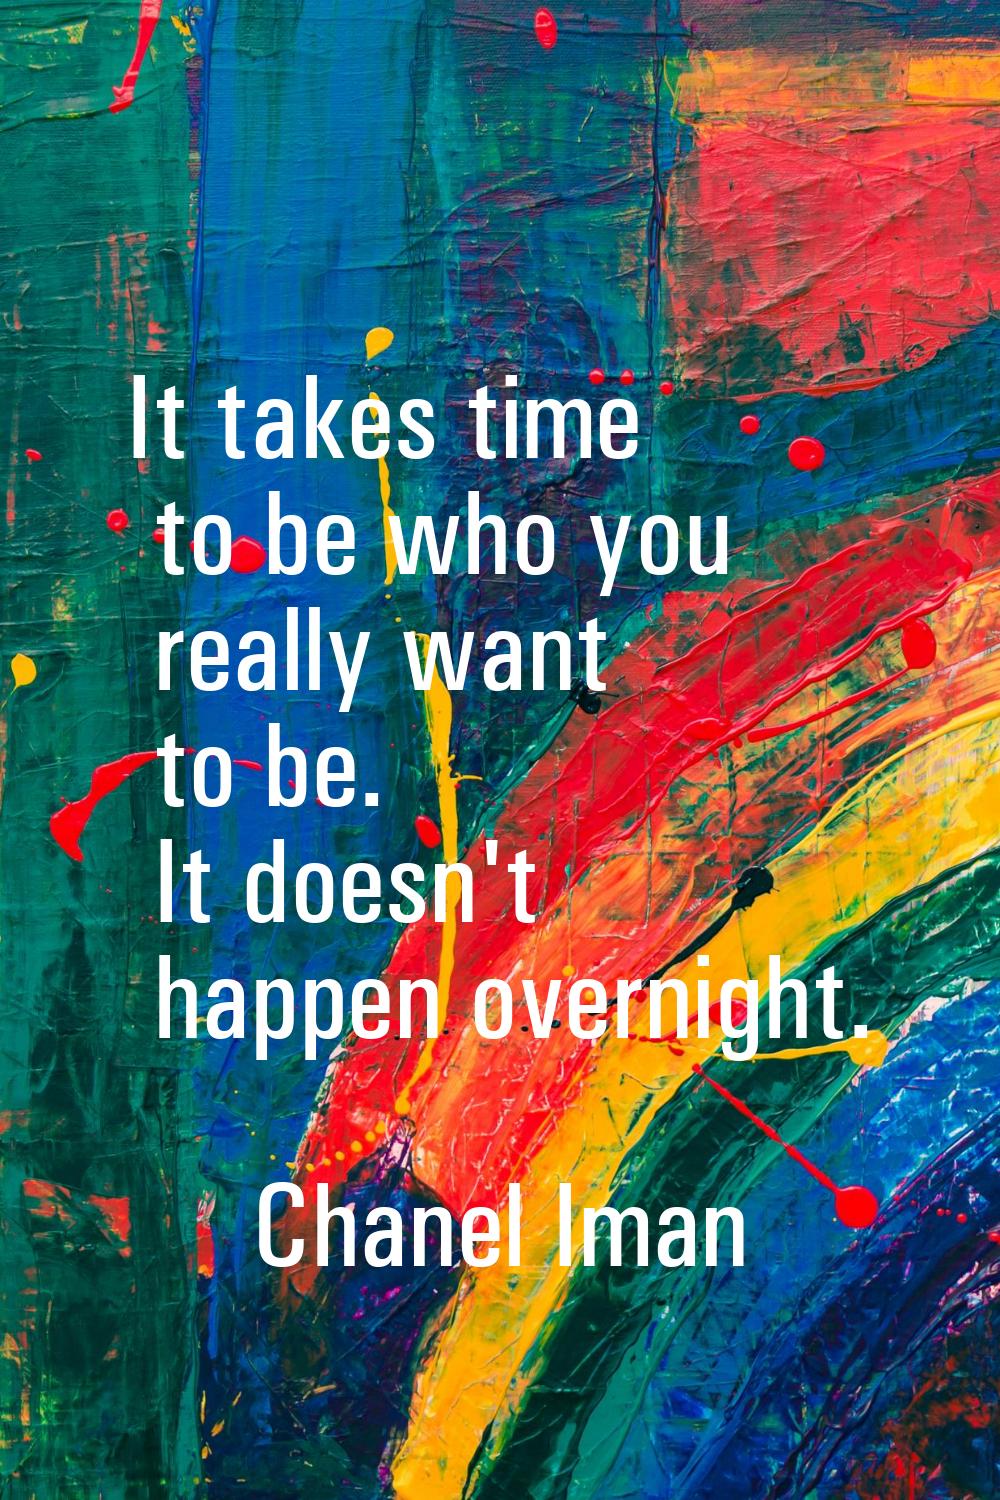 It takes time to be who you really want to be. It doesn't happen overnight.